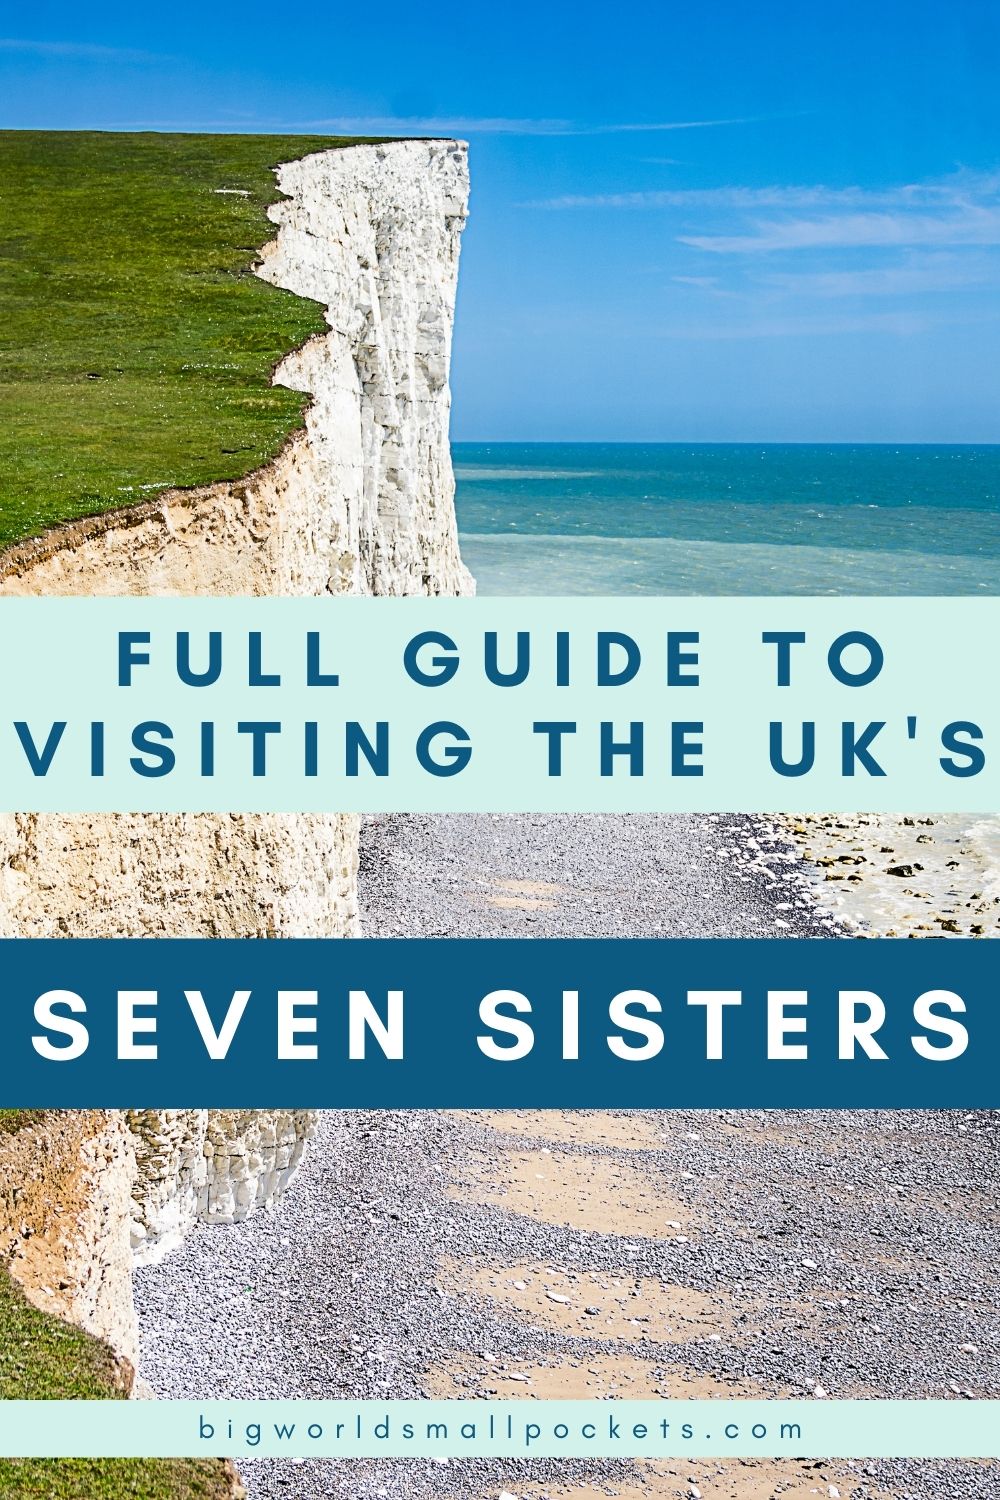 Full Guide to Visiting the Seven Sisters Cliffs in England